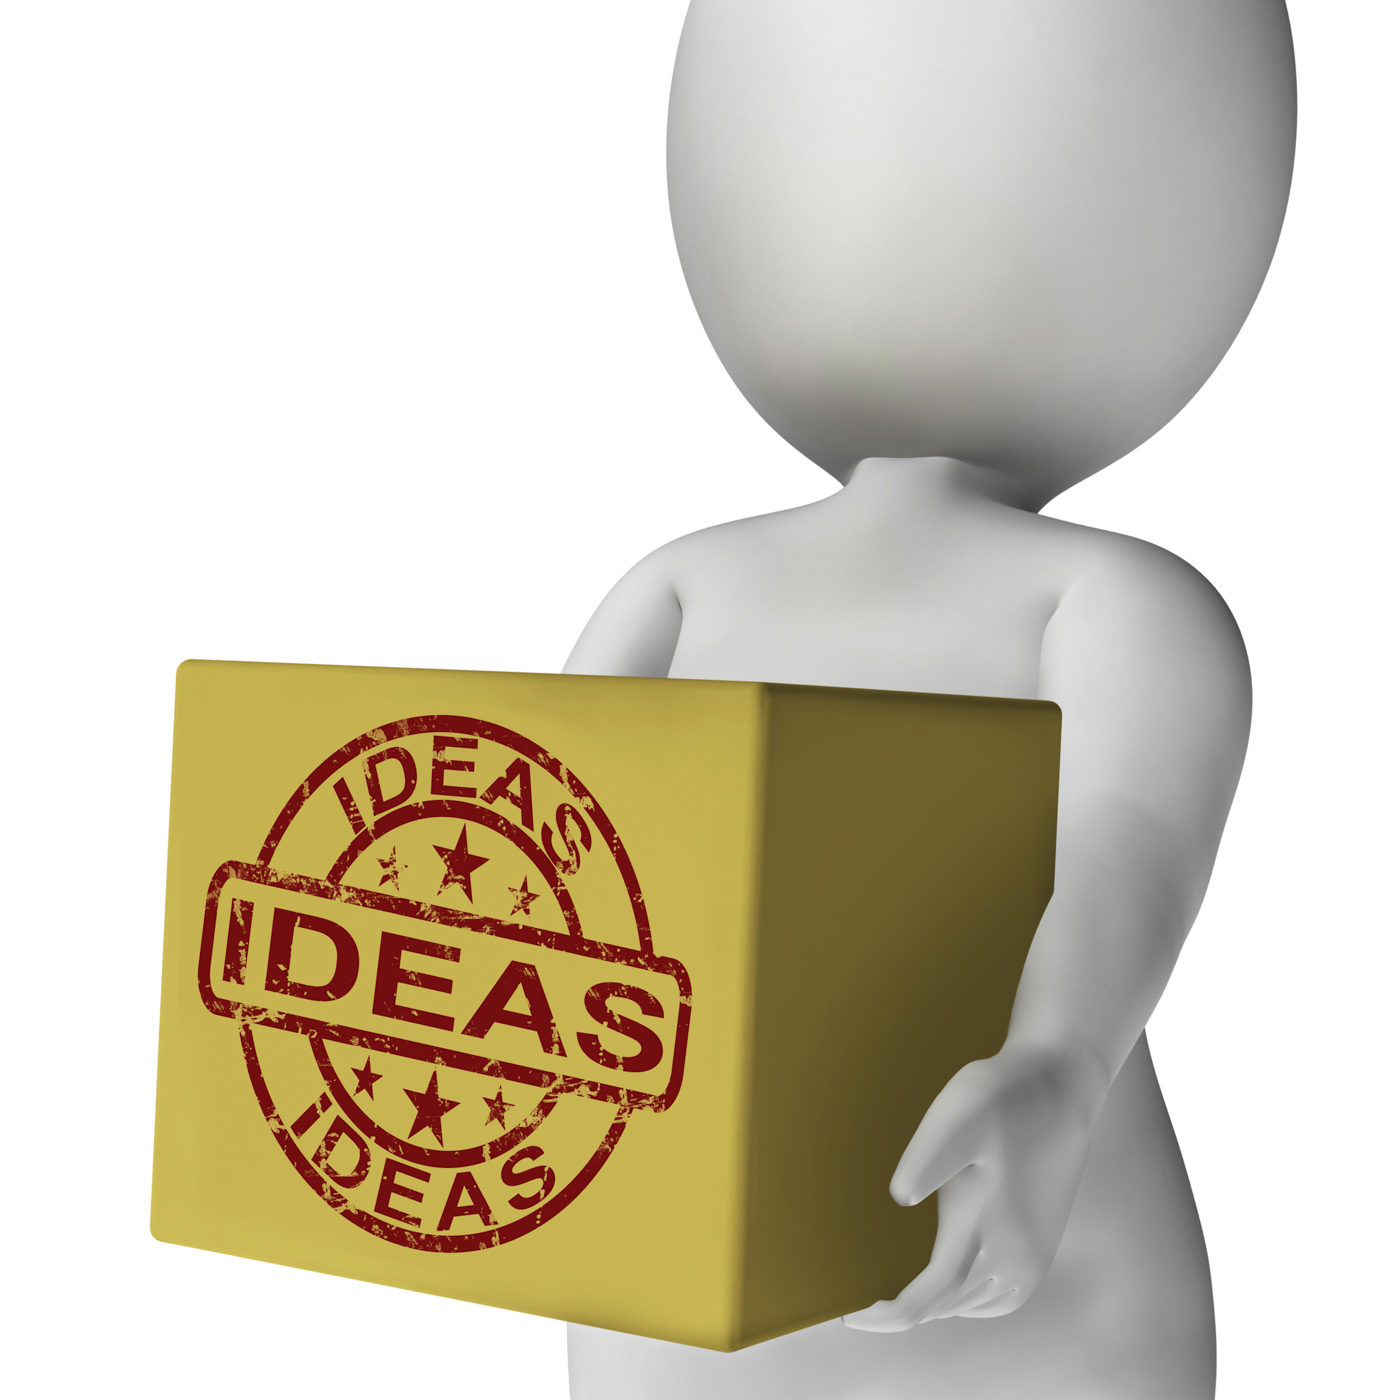 Ideas box means inspire innovate and plan photo